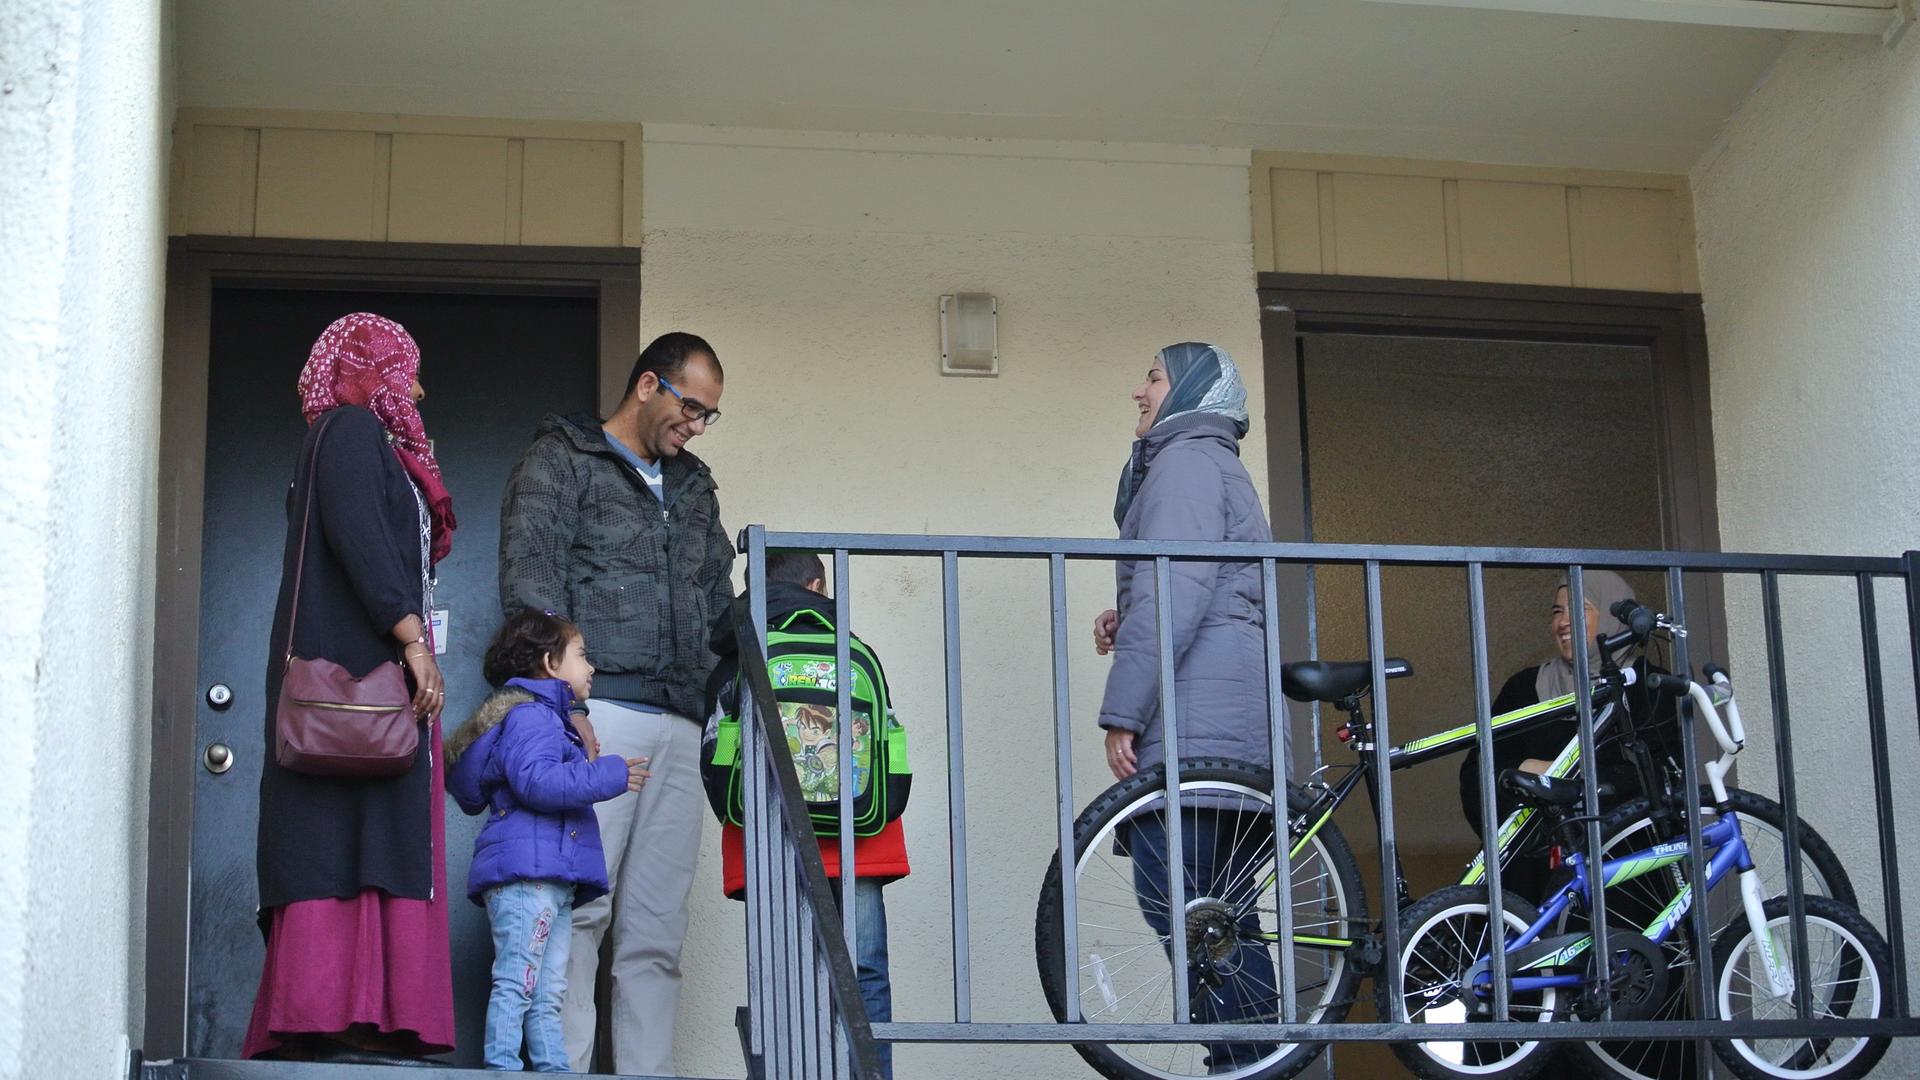 Tamam Al Sharaa and his family at their apartment in North Dallas, Texas. 